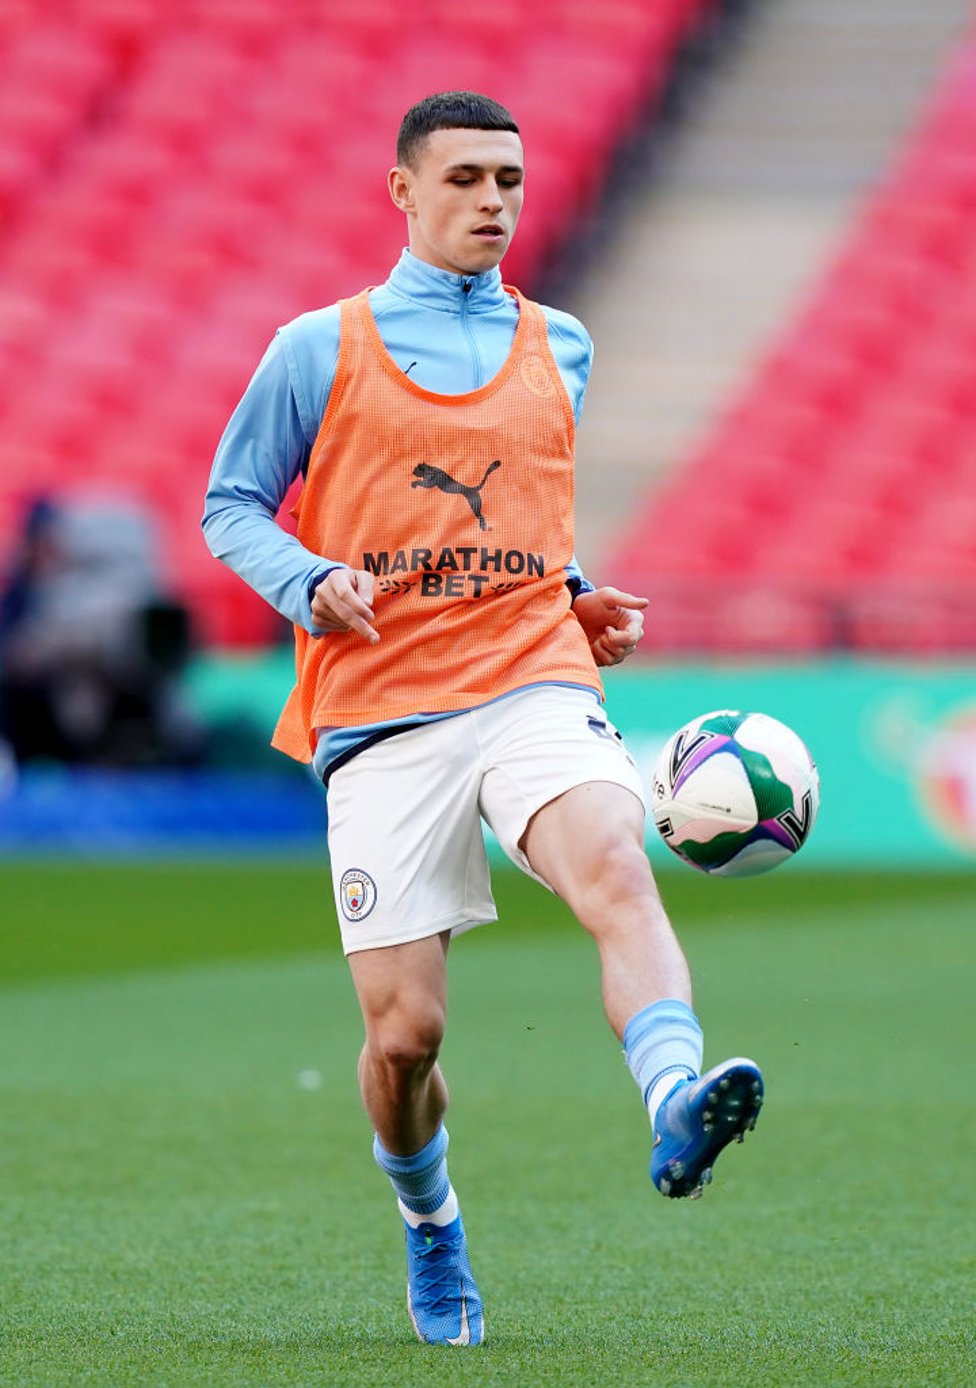 GAME FACE : Foden looks fully focused as he gets a feel of the ball pre-match.